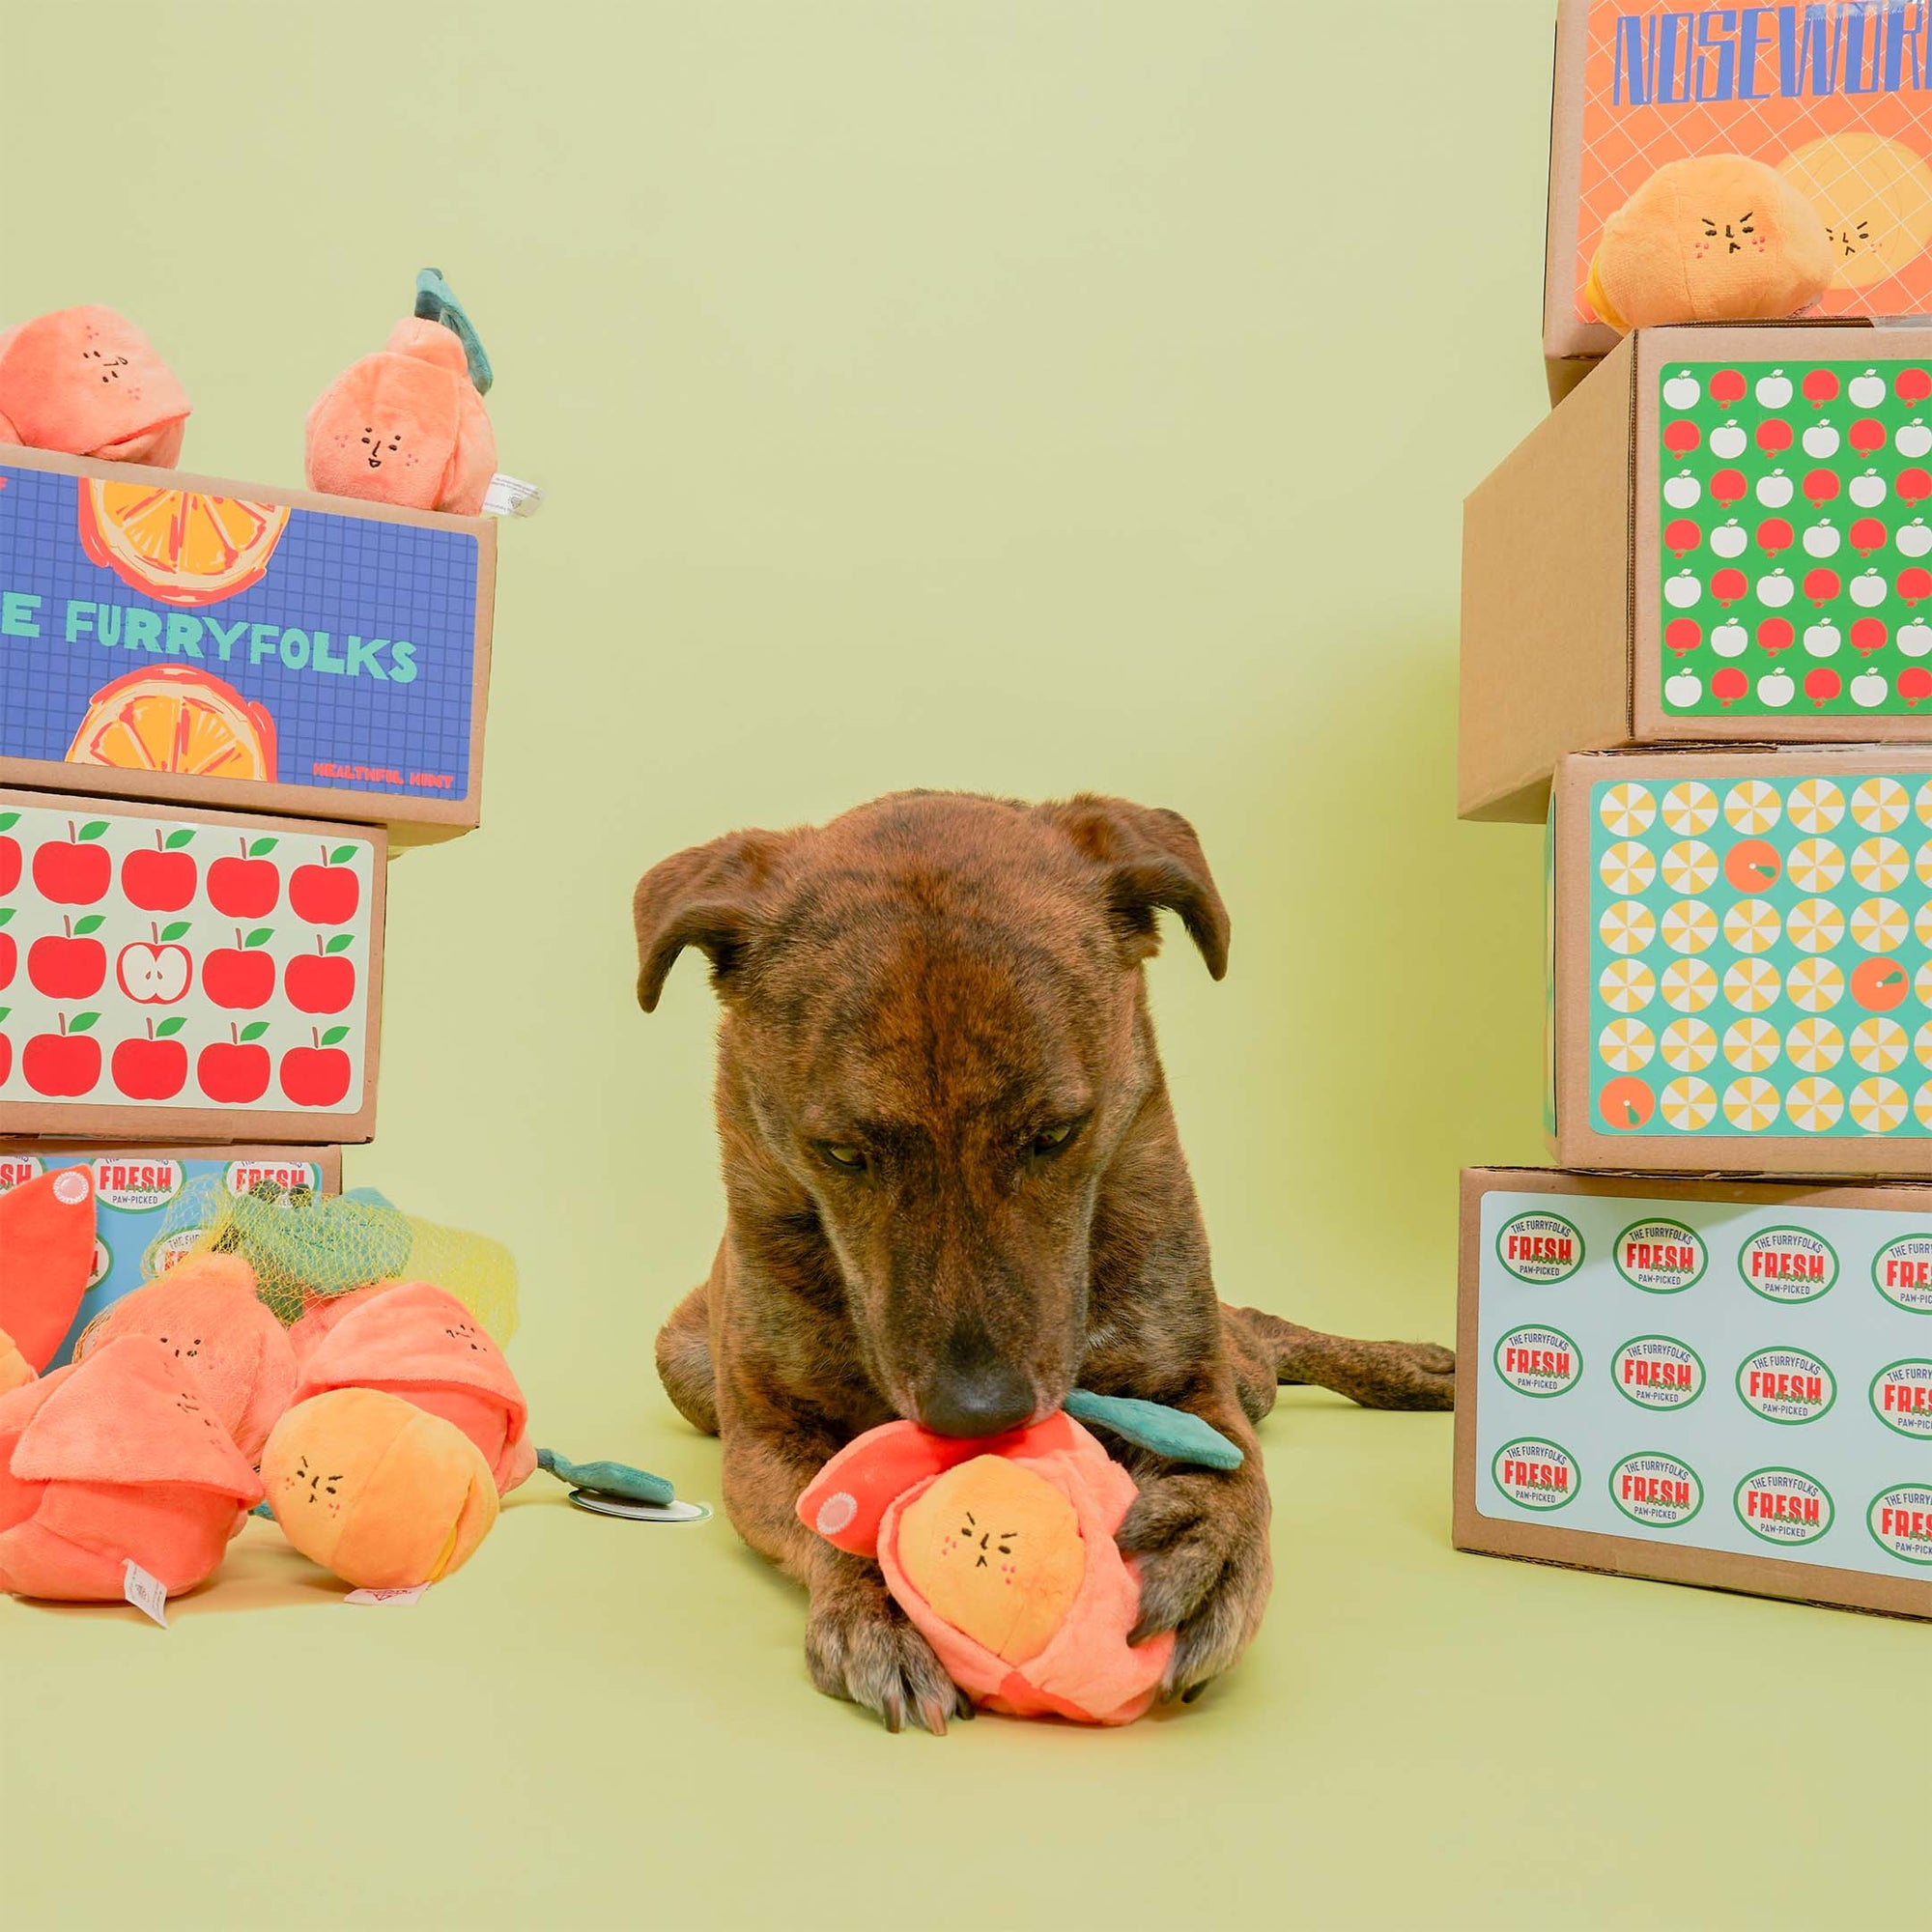 A brown dog is examining an orange-shaped dog toy on a greenish-yellow background. Stacked boxes labeled "The Furryfolks Orange Nosework Toy" surround it, indicating a focus on playful and healthy pet activities.